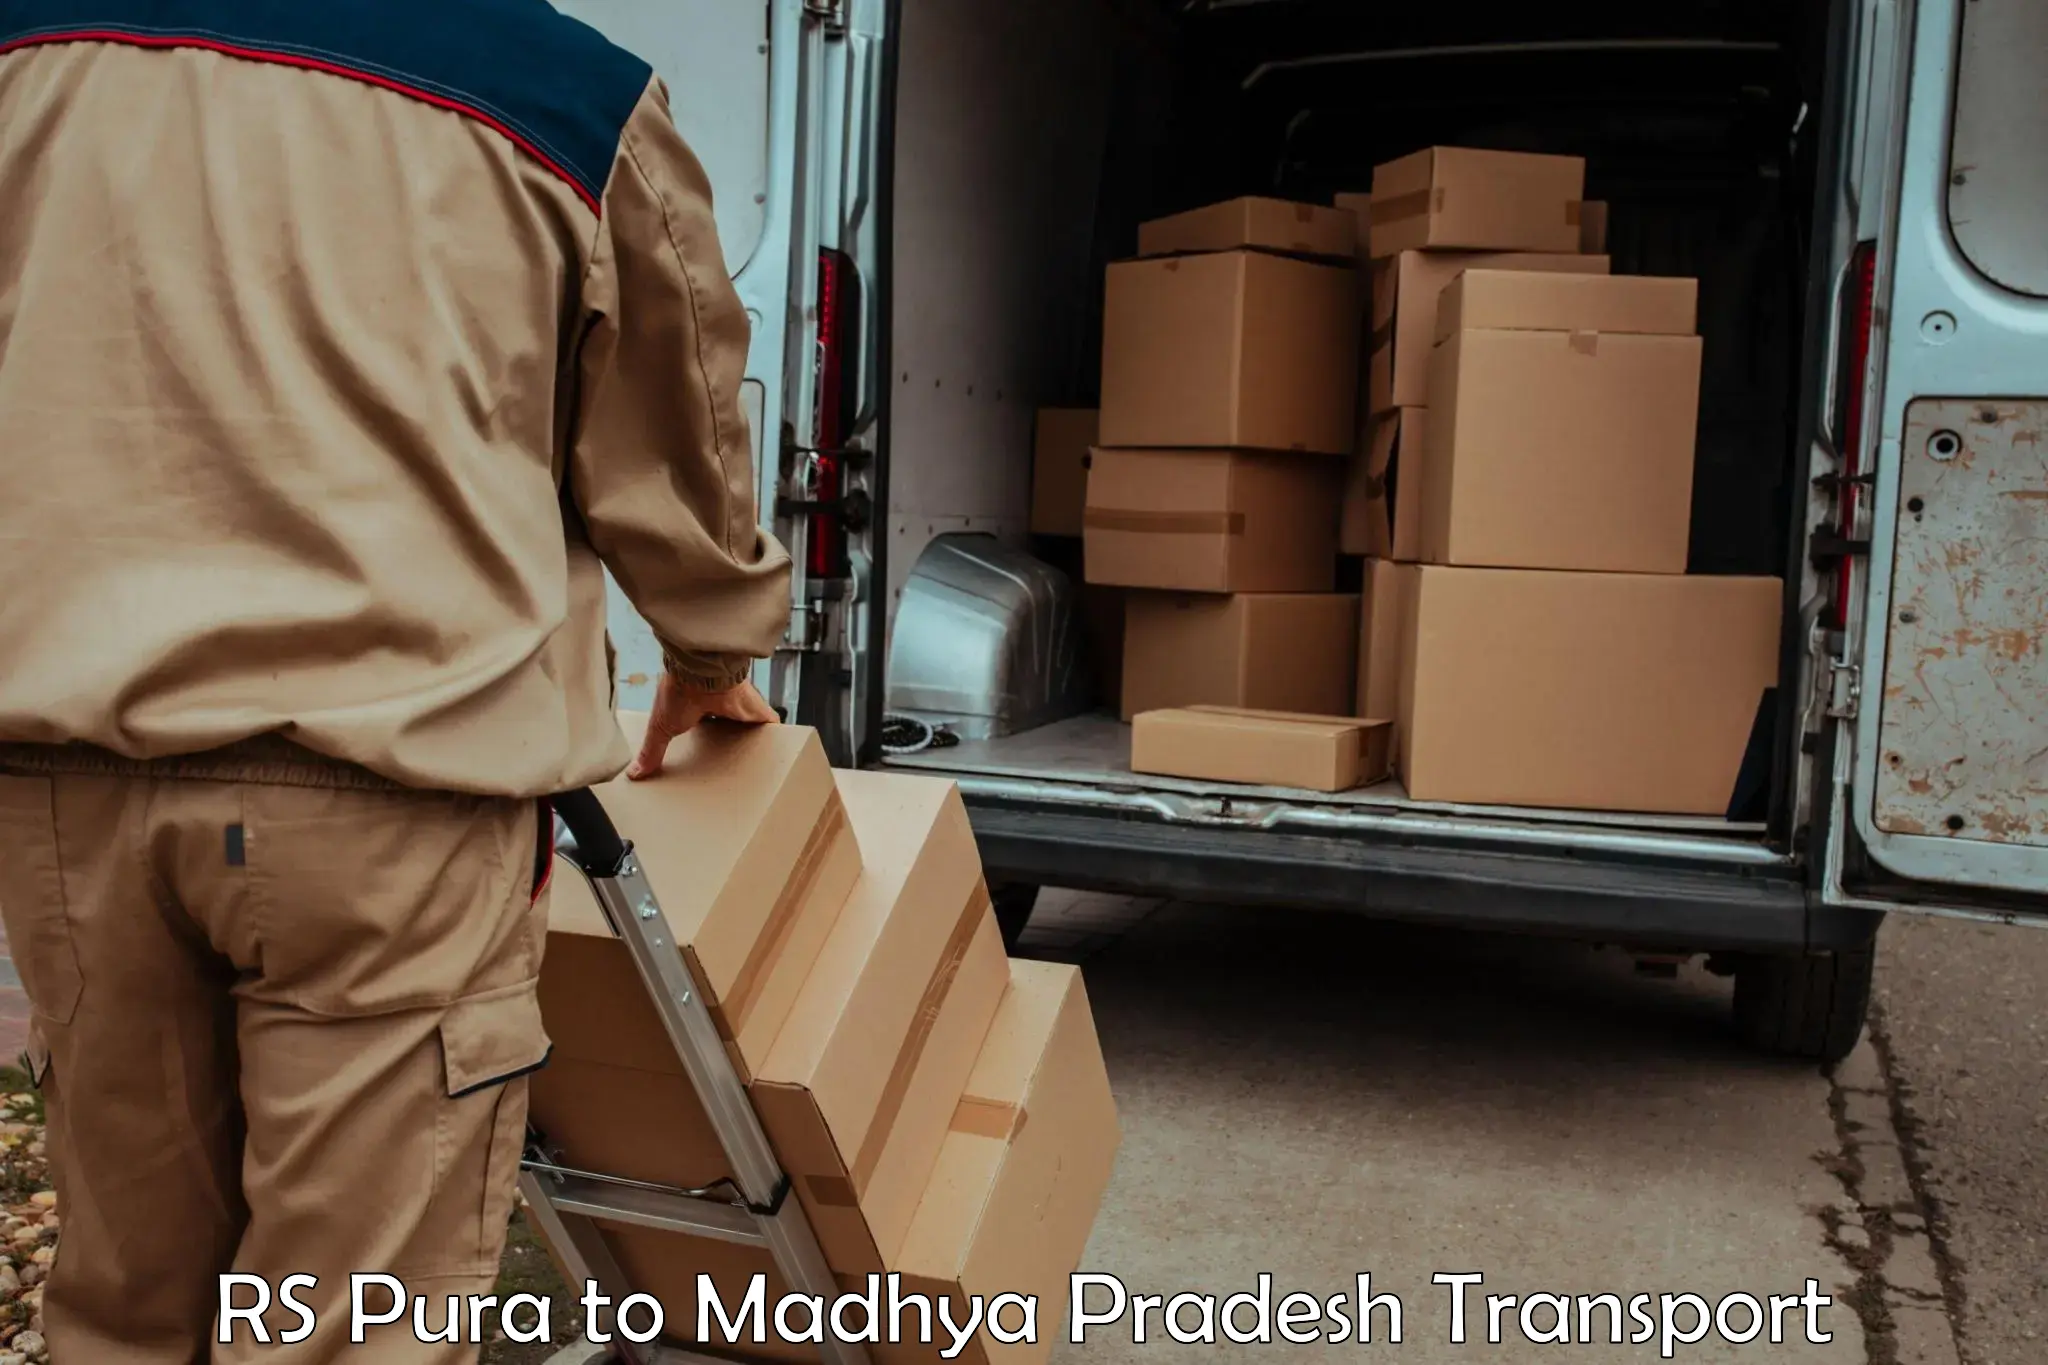 Package delivery services in RS Pura to Silwani